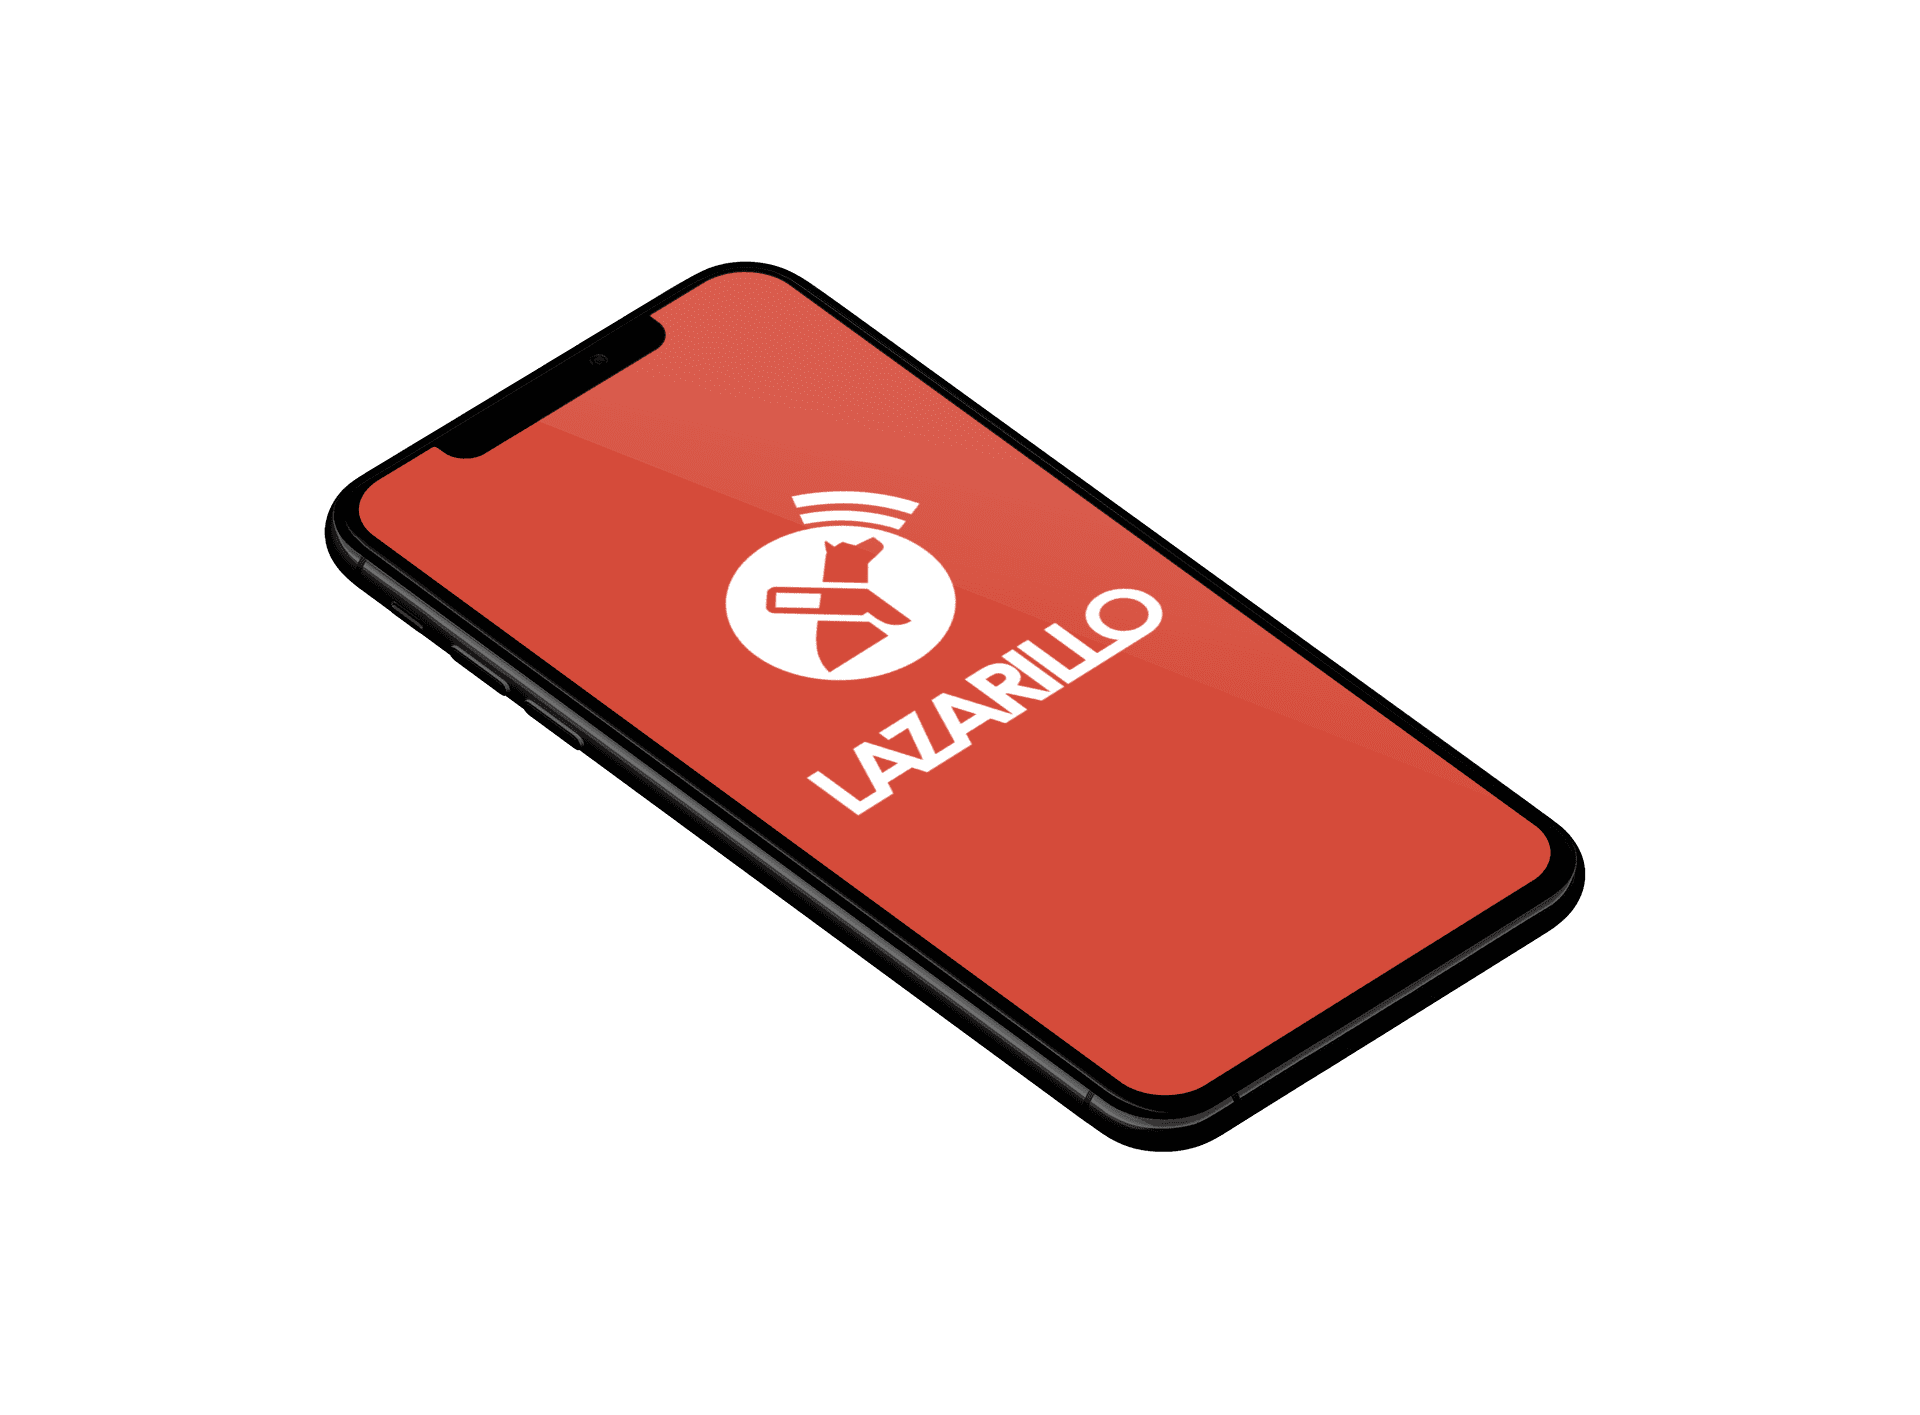 Mockup of the Lazarillo logo on a phone